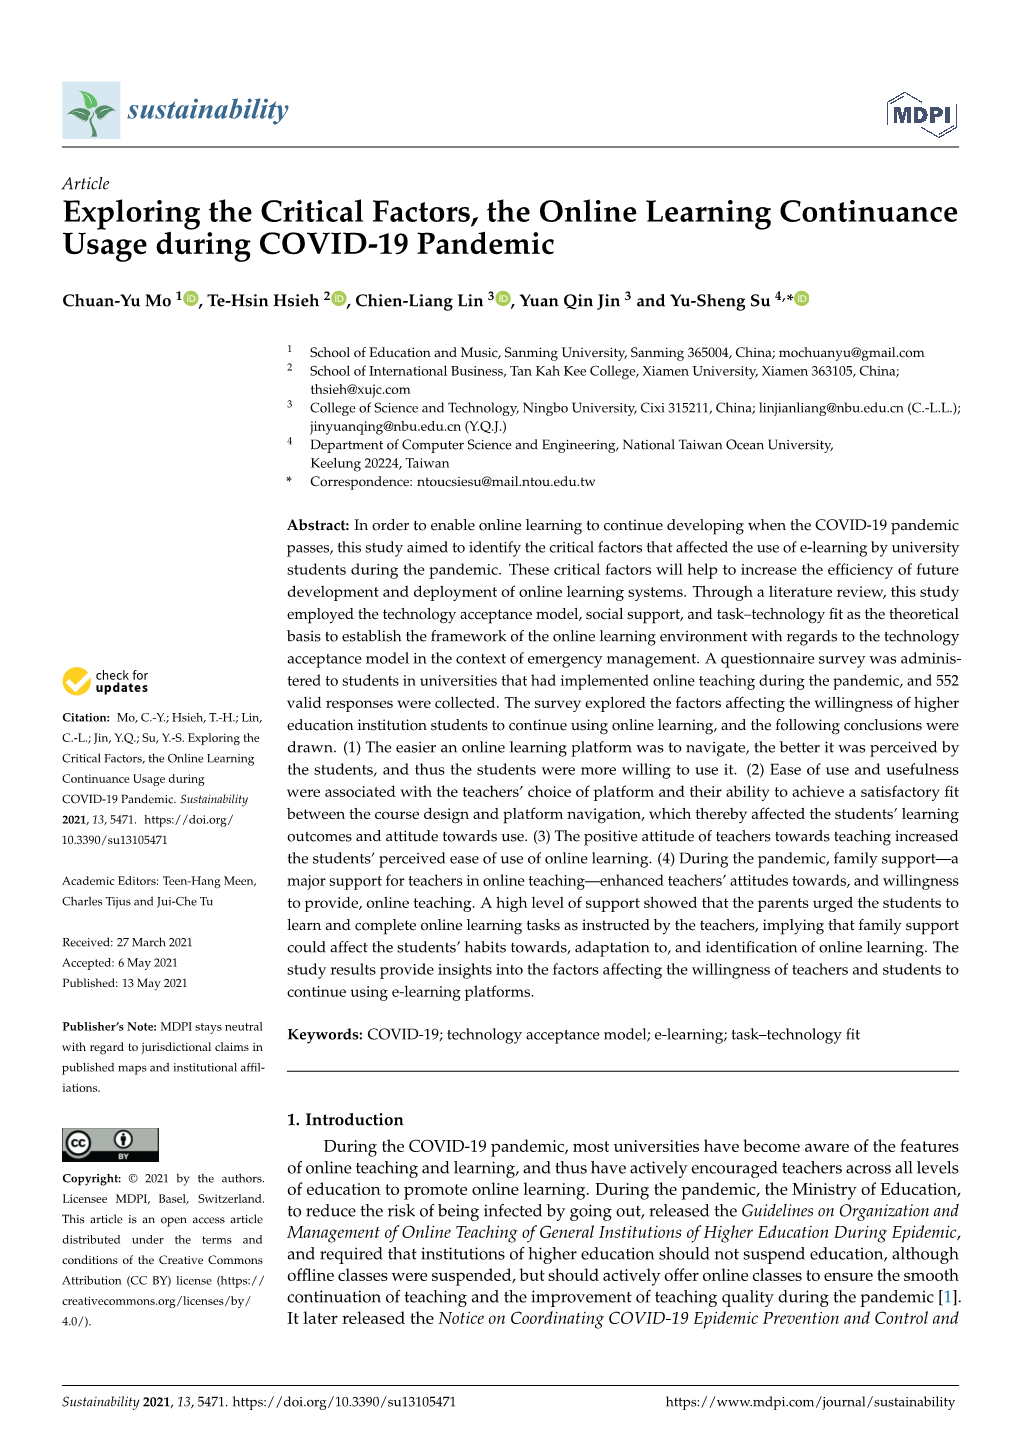 Exploring the Critical Factors, the Online Learning Continuance Usage During COVID-19 Pandemic